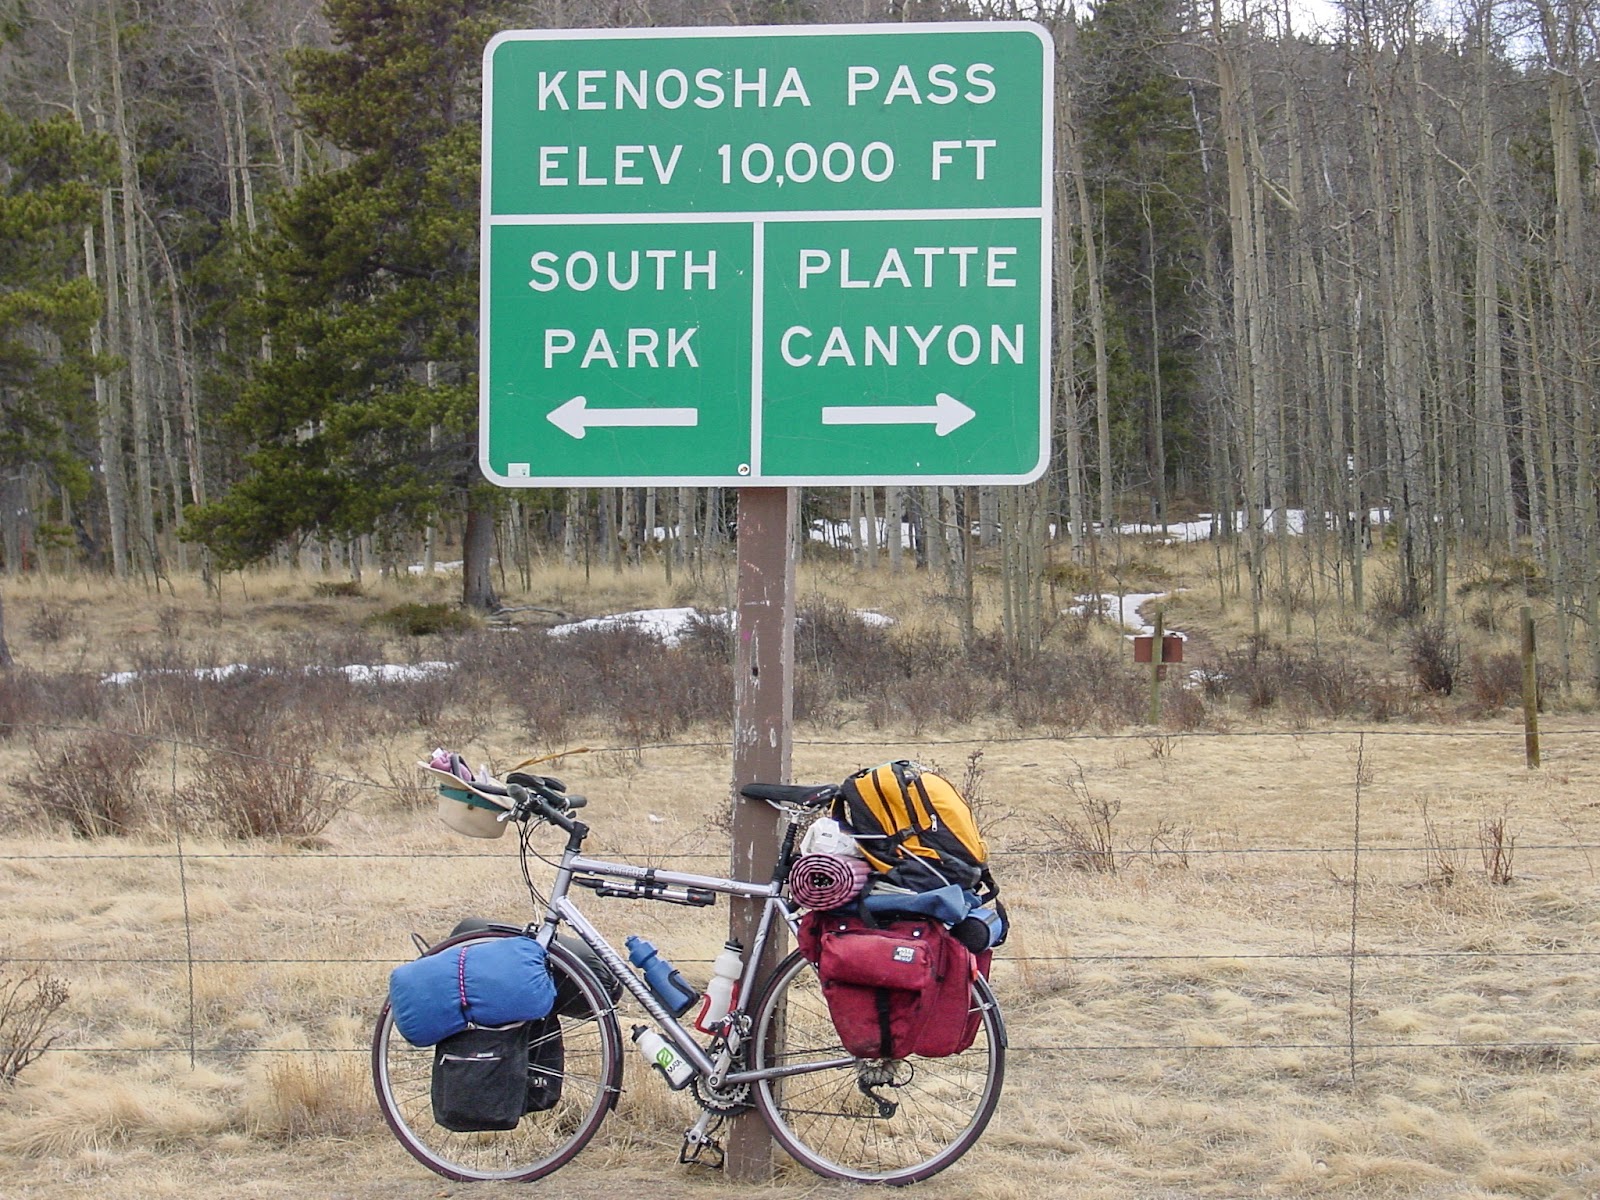 Bike leans on a sign that says: "Kenosha Pass Elev 10,000 ft." Pointing to the left it says: "South Park" and to the right it says: "Platte Canyon"